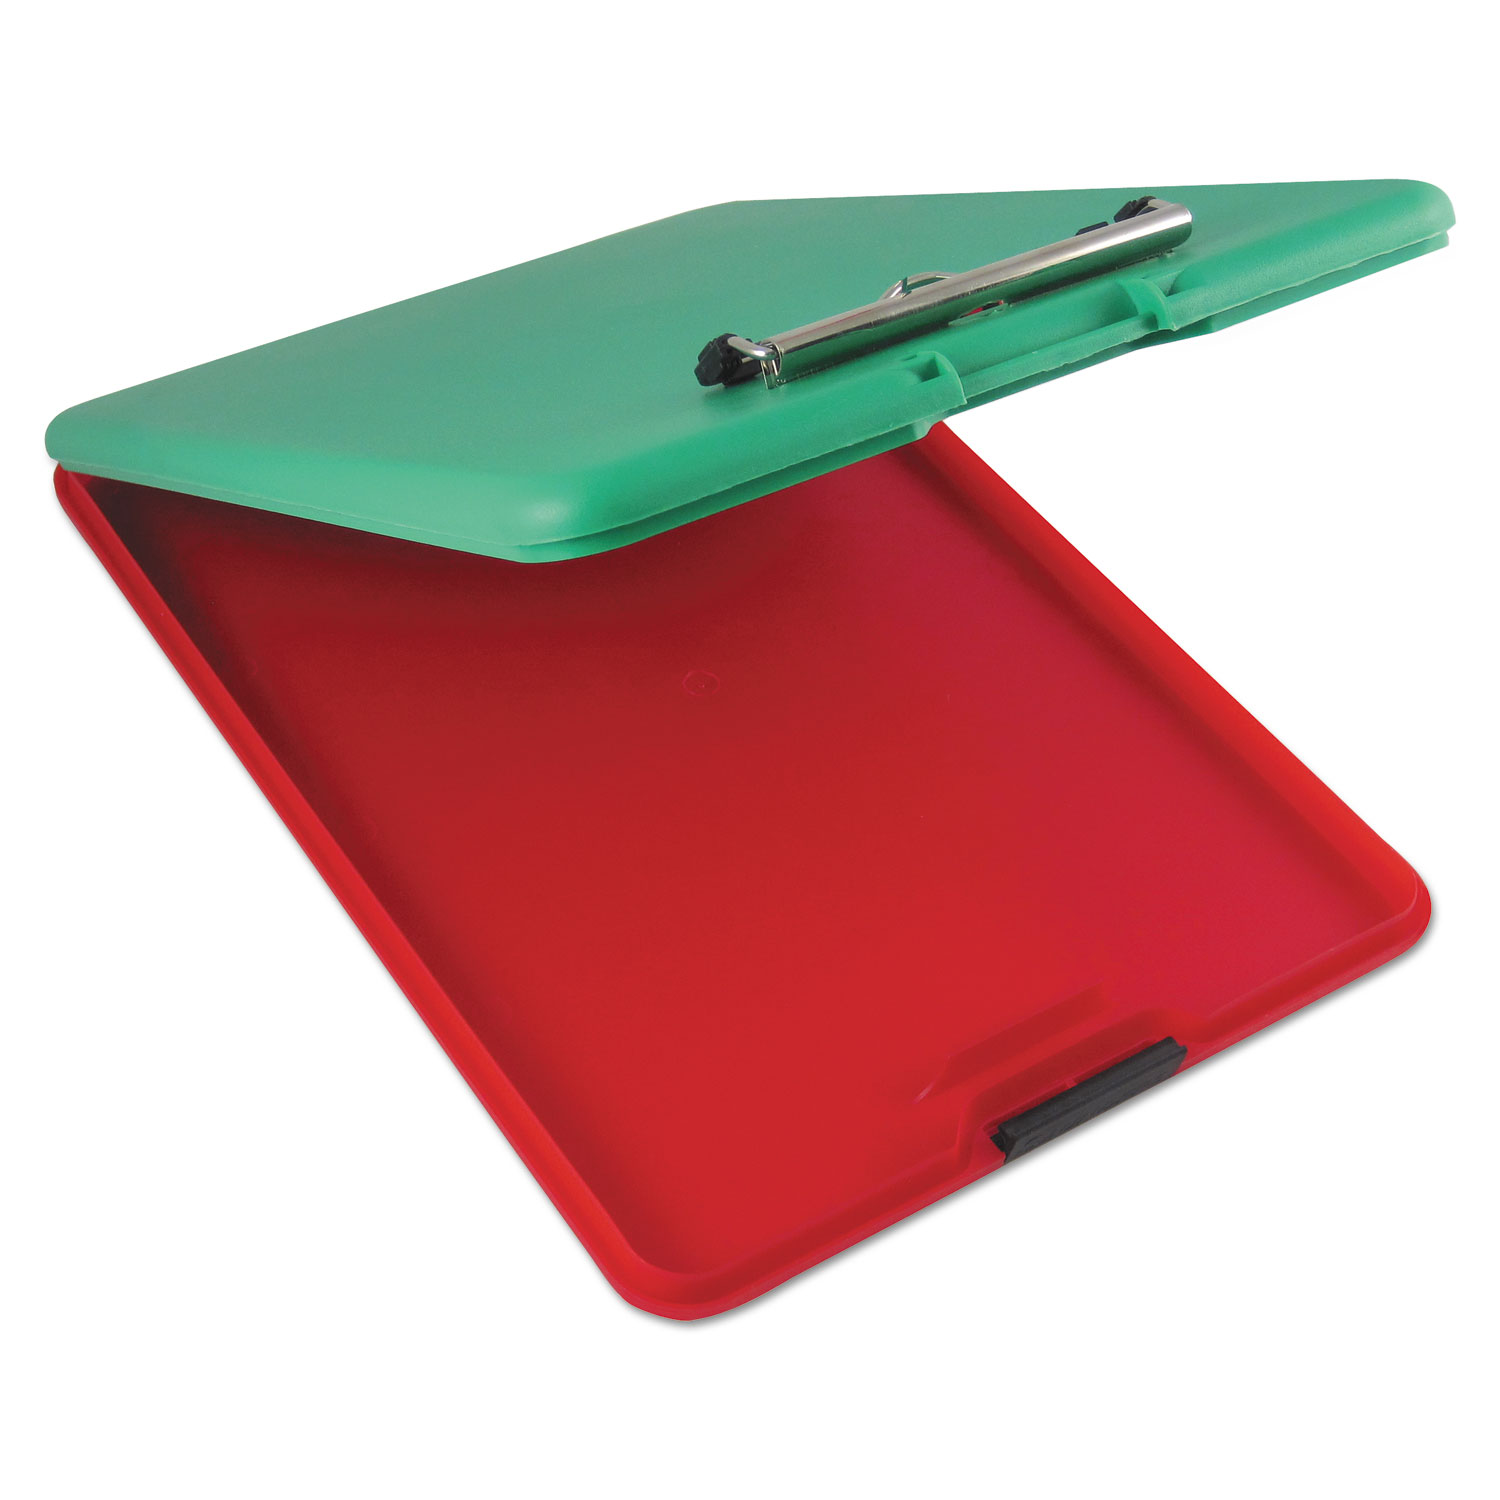 SlimMate Show2Know Safety Organizer, 1/2 Clip Cap, 9 x 11 3/4 Sheets, Red/Green